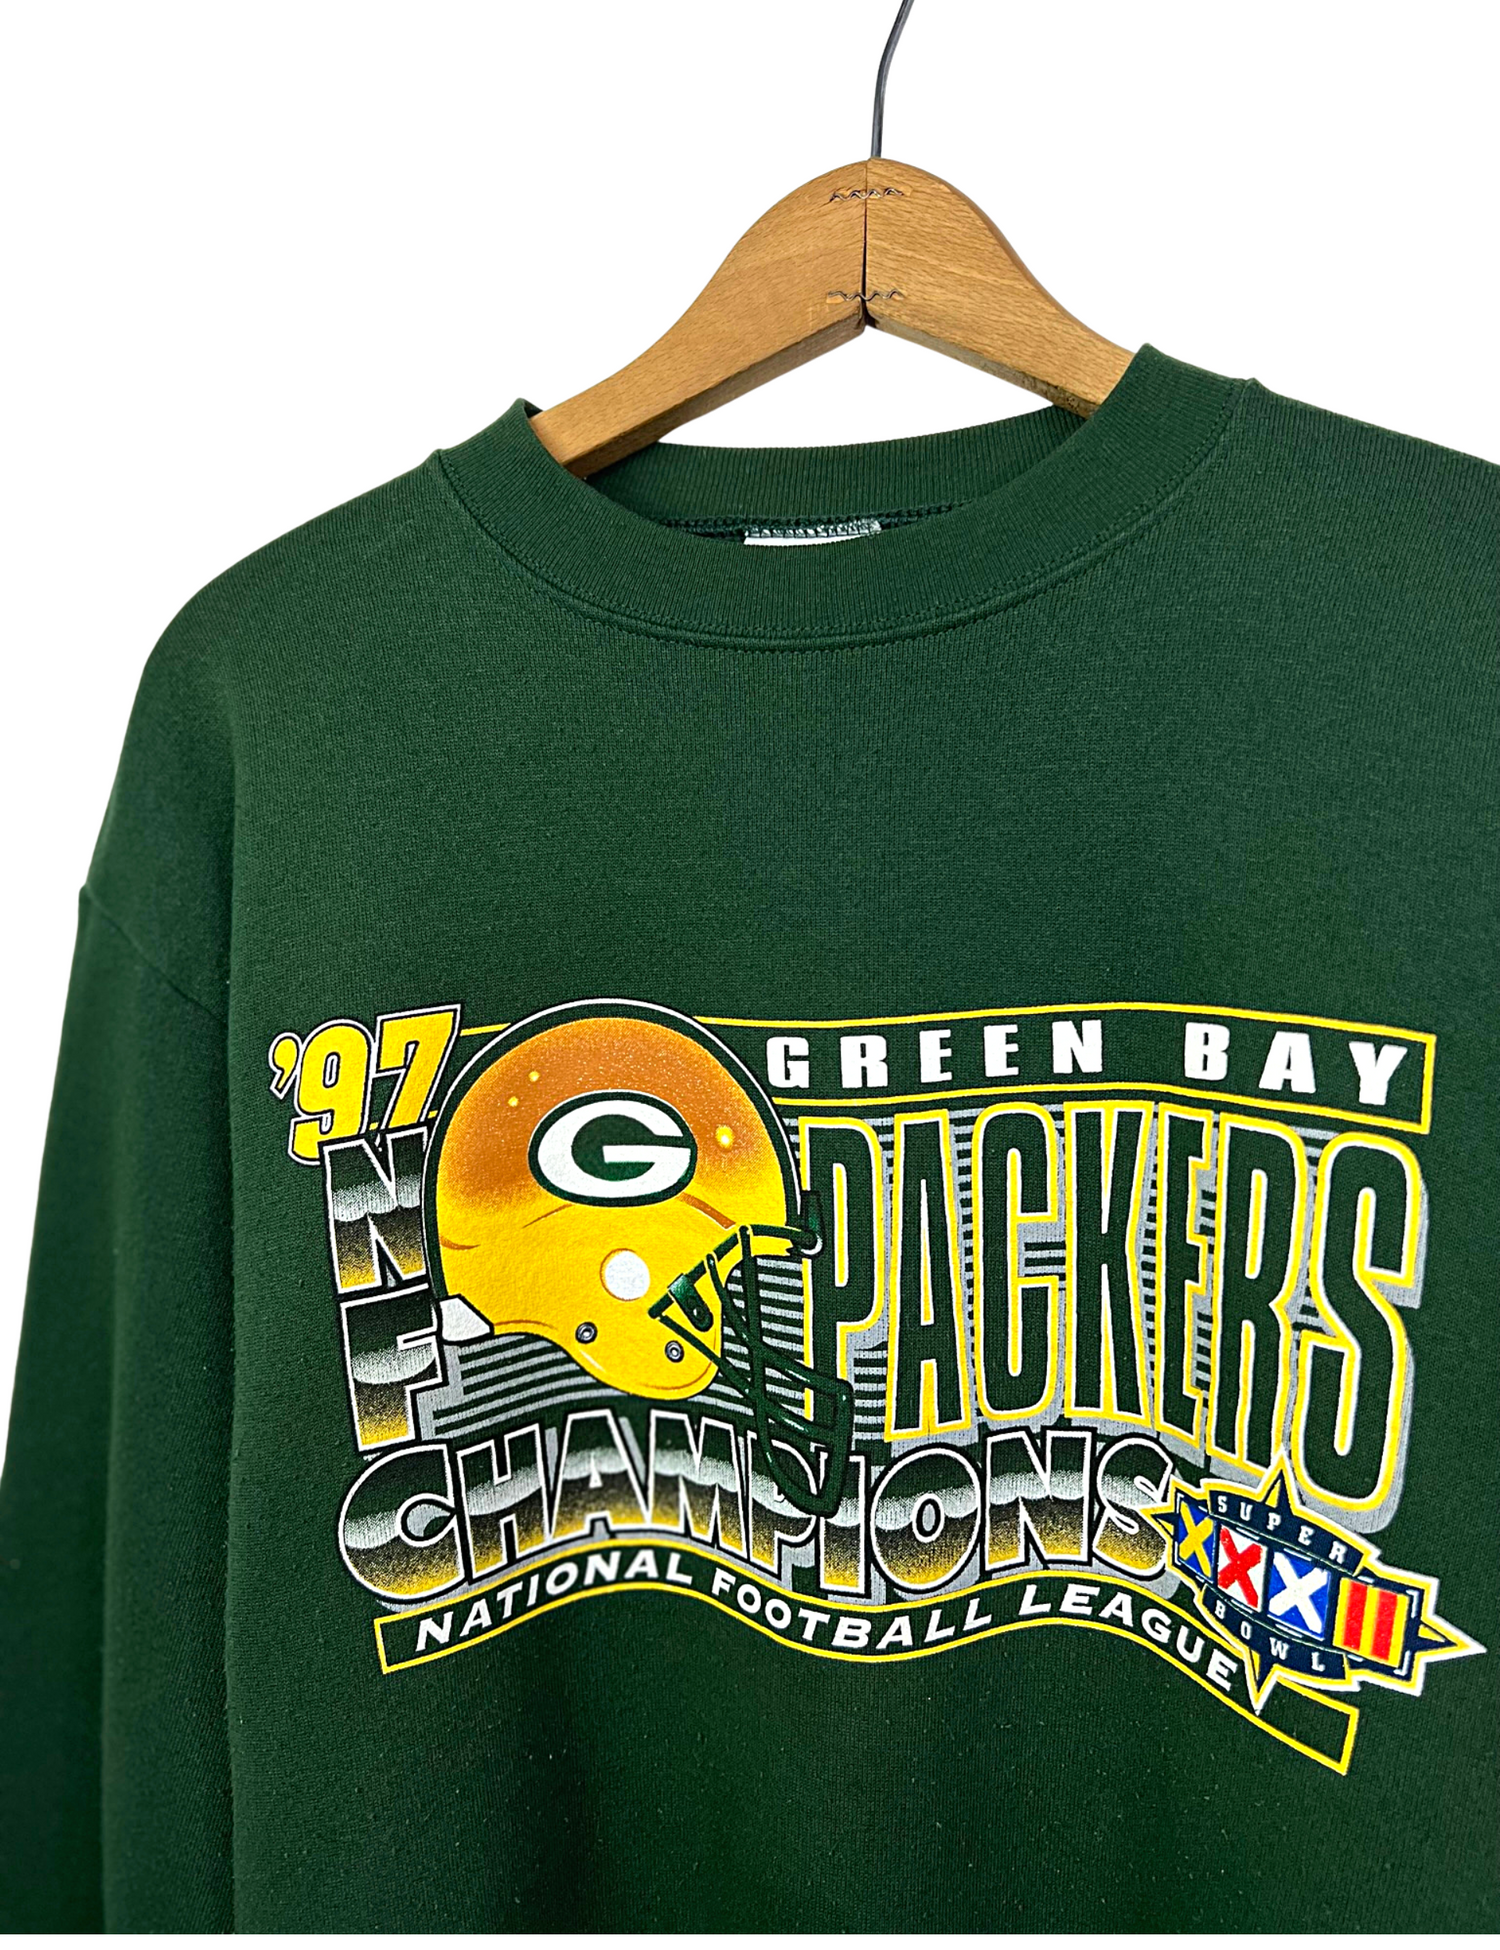 Vintage 1997 NFL Green Bay Packers Super Bowl Champions Nfc North